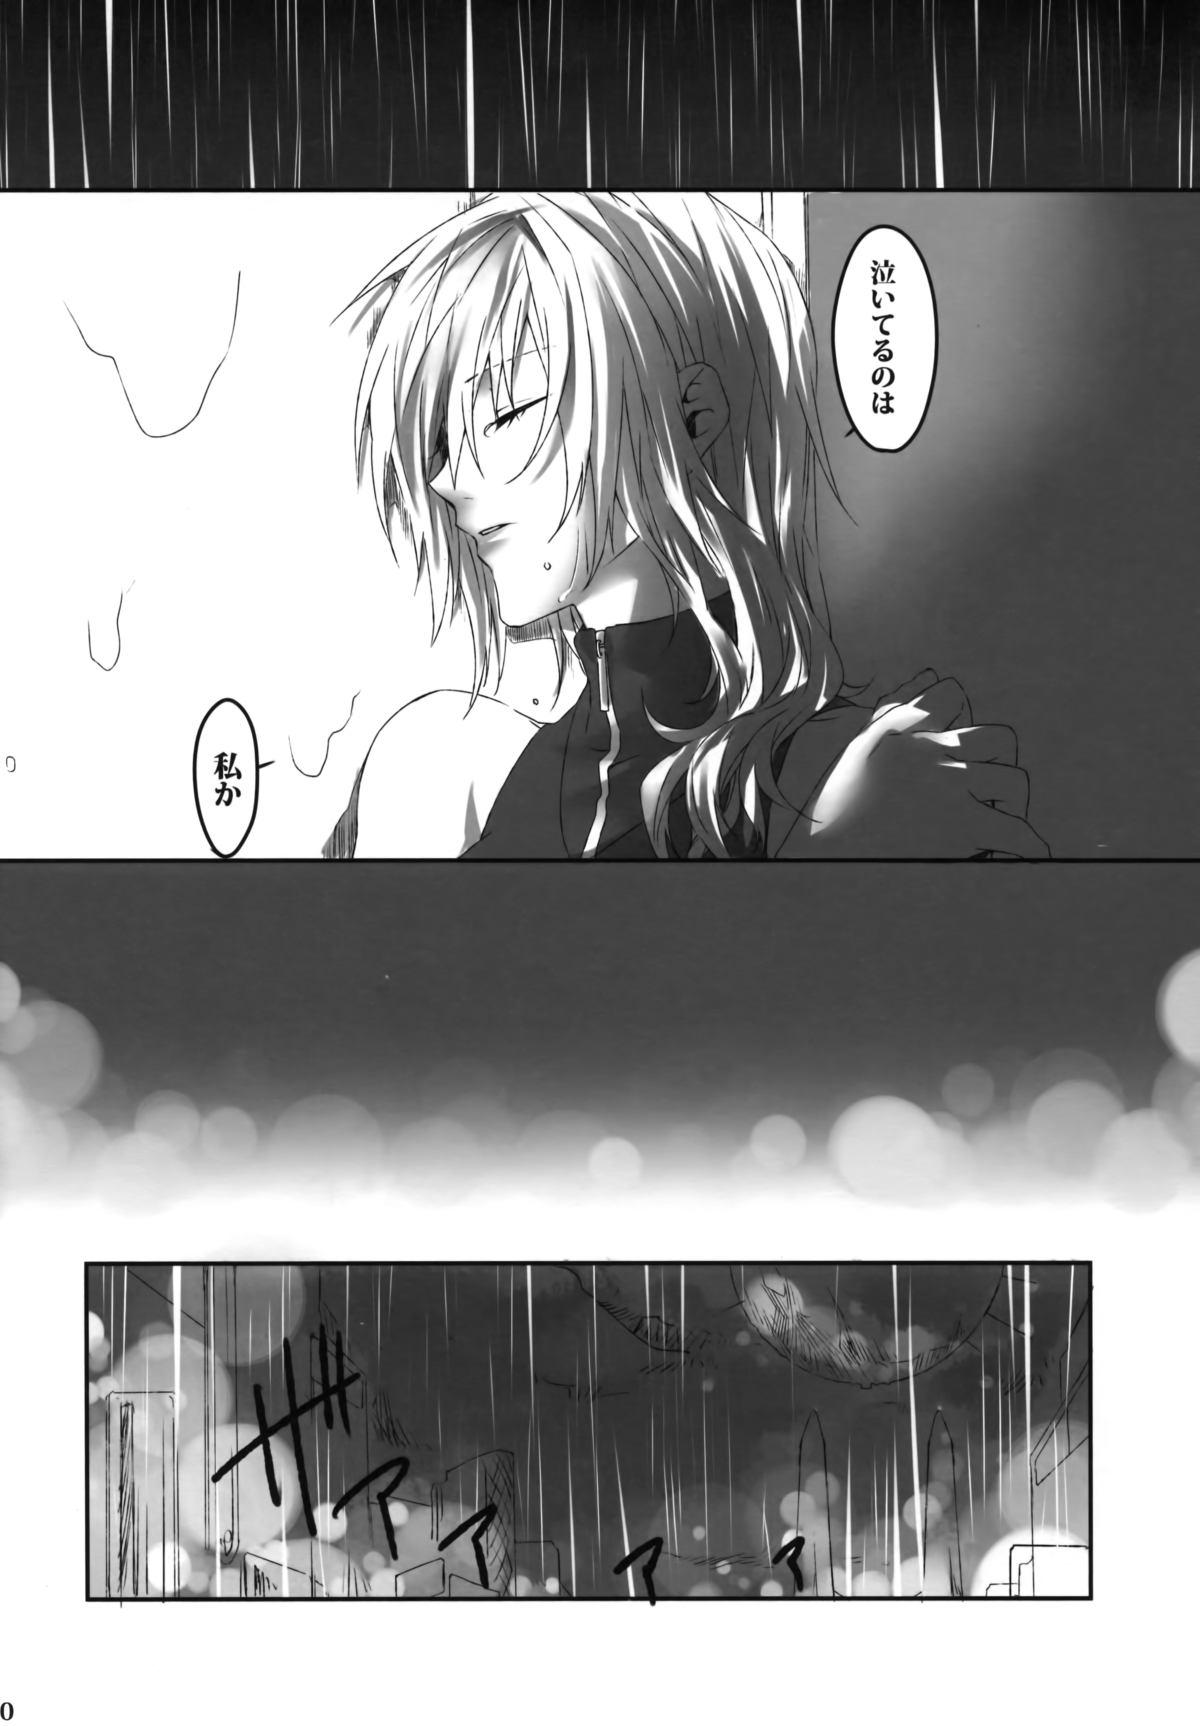 Relax Amayo no Hoshi - Final fantasy xiii Story - Page 10